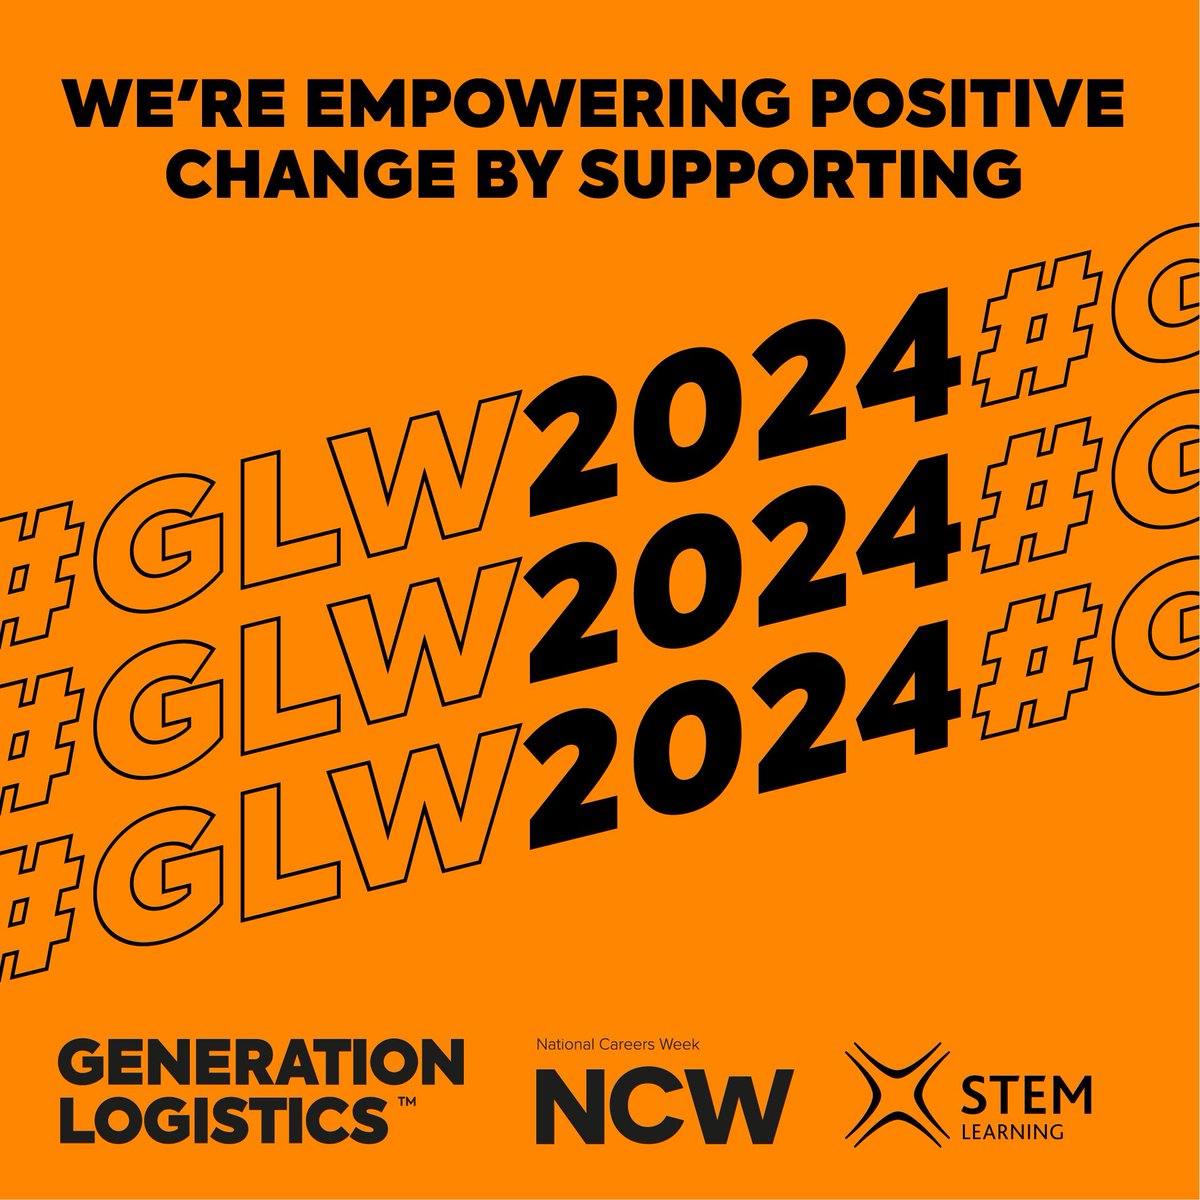 Generation Logistics have recently updated their FREE education resources on their Education Hub.
 
You will find access to Generation Logistics Ambassadors, who can attend schools to support with engagement activities.

#GLW2024